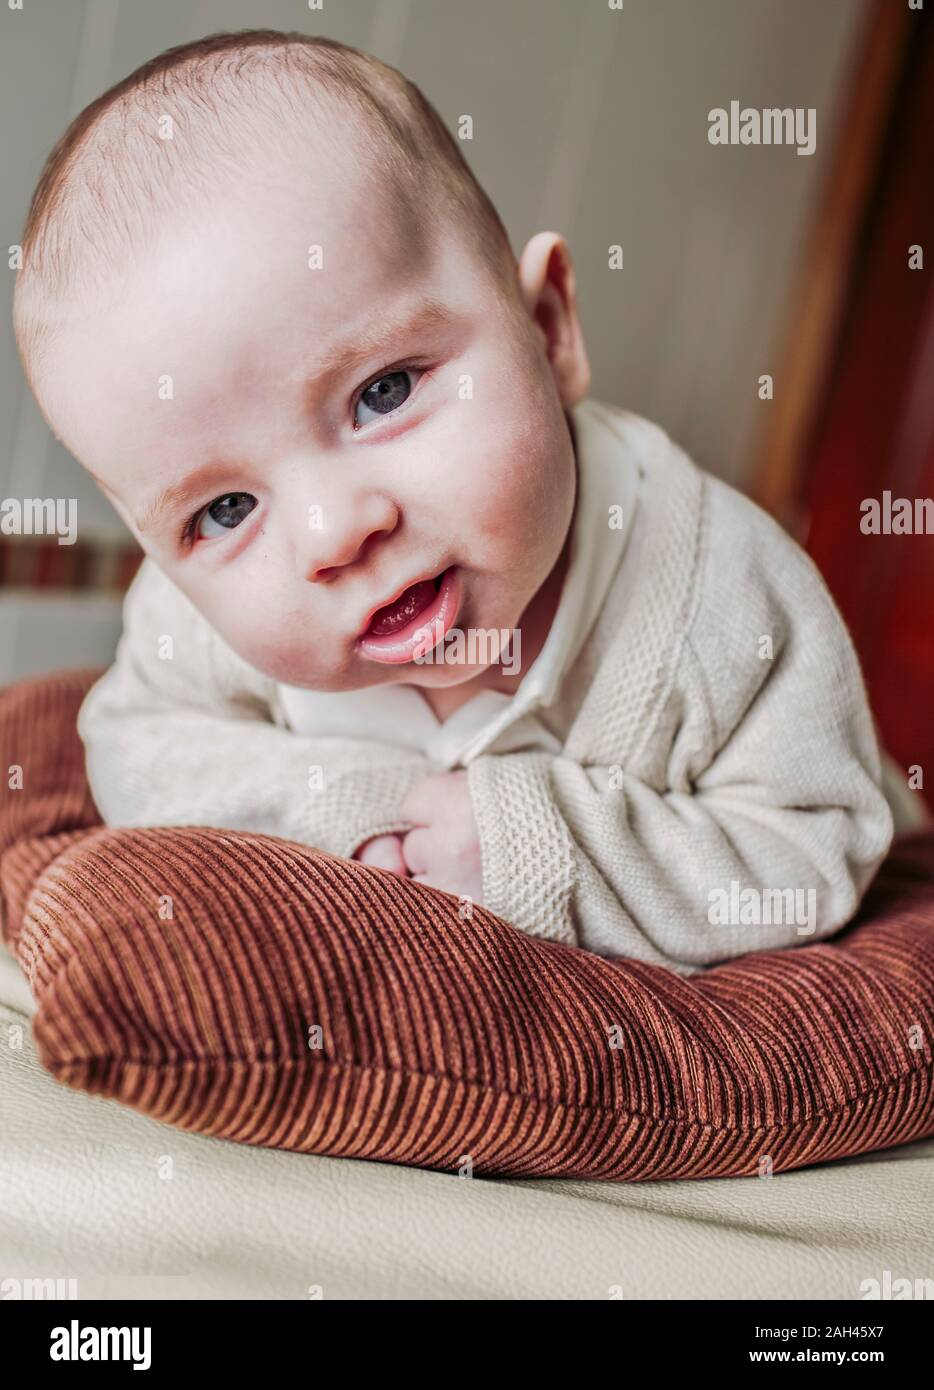 Portrait of baby boy lying on a bed Banque D'Images